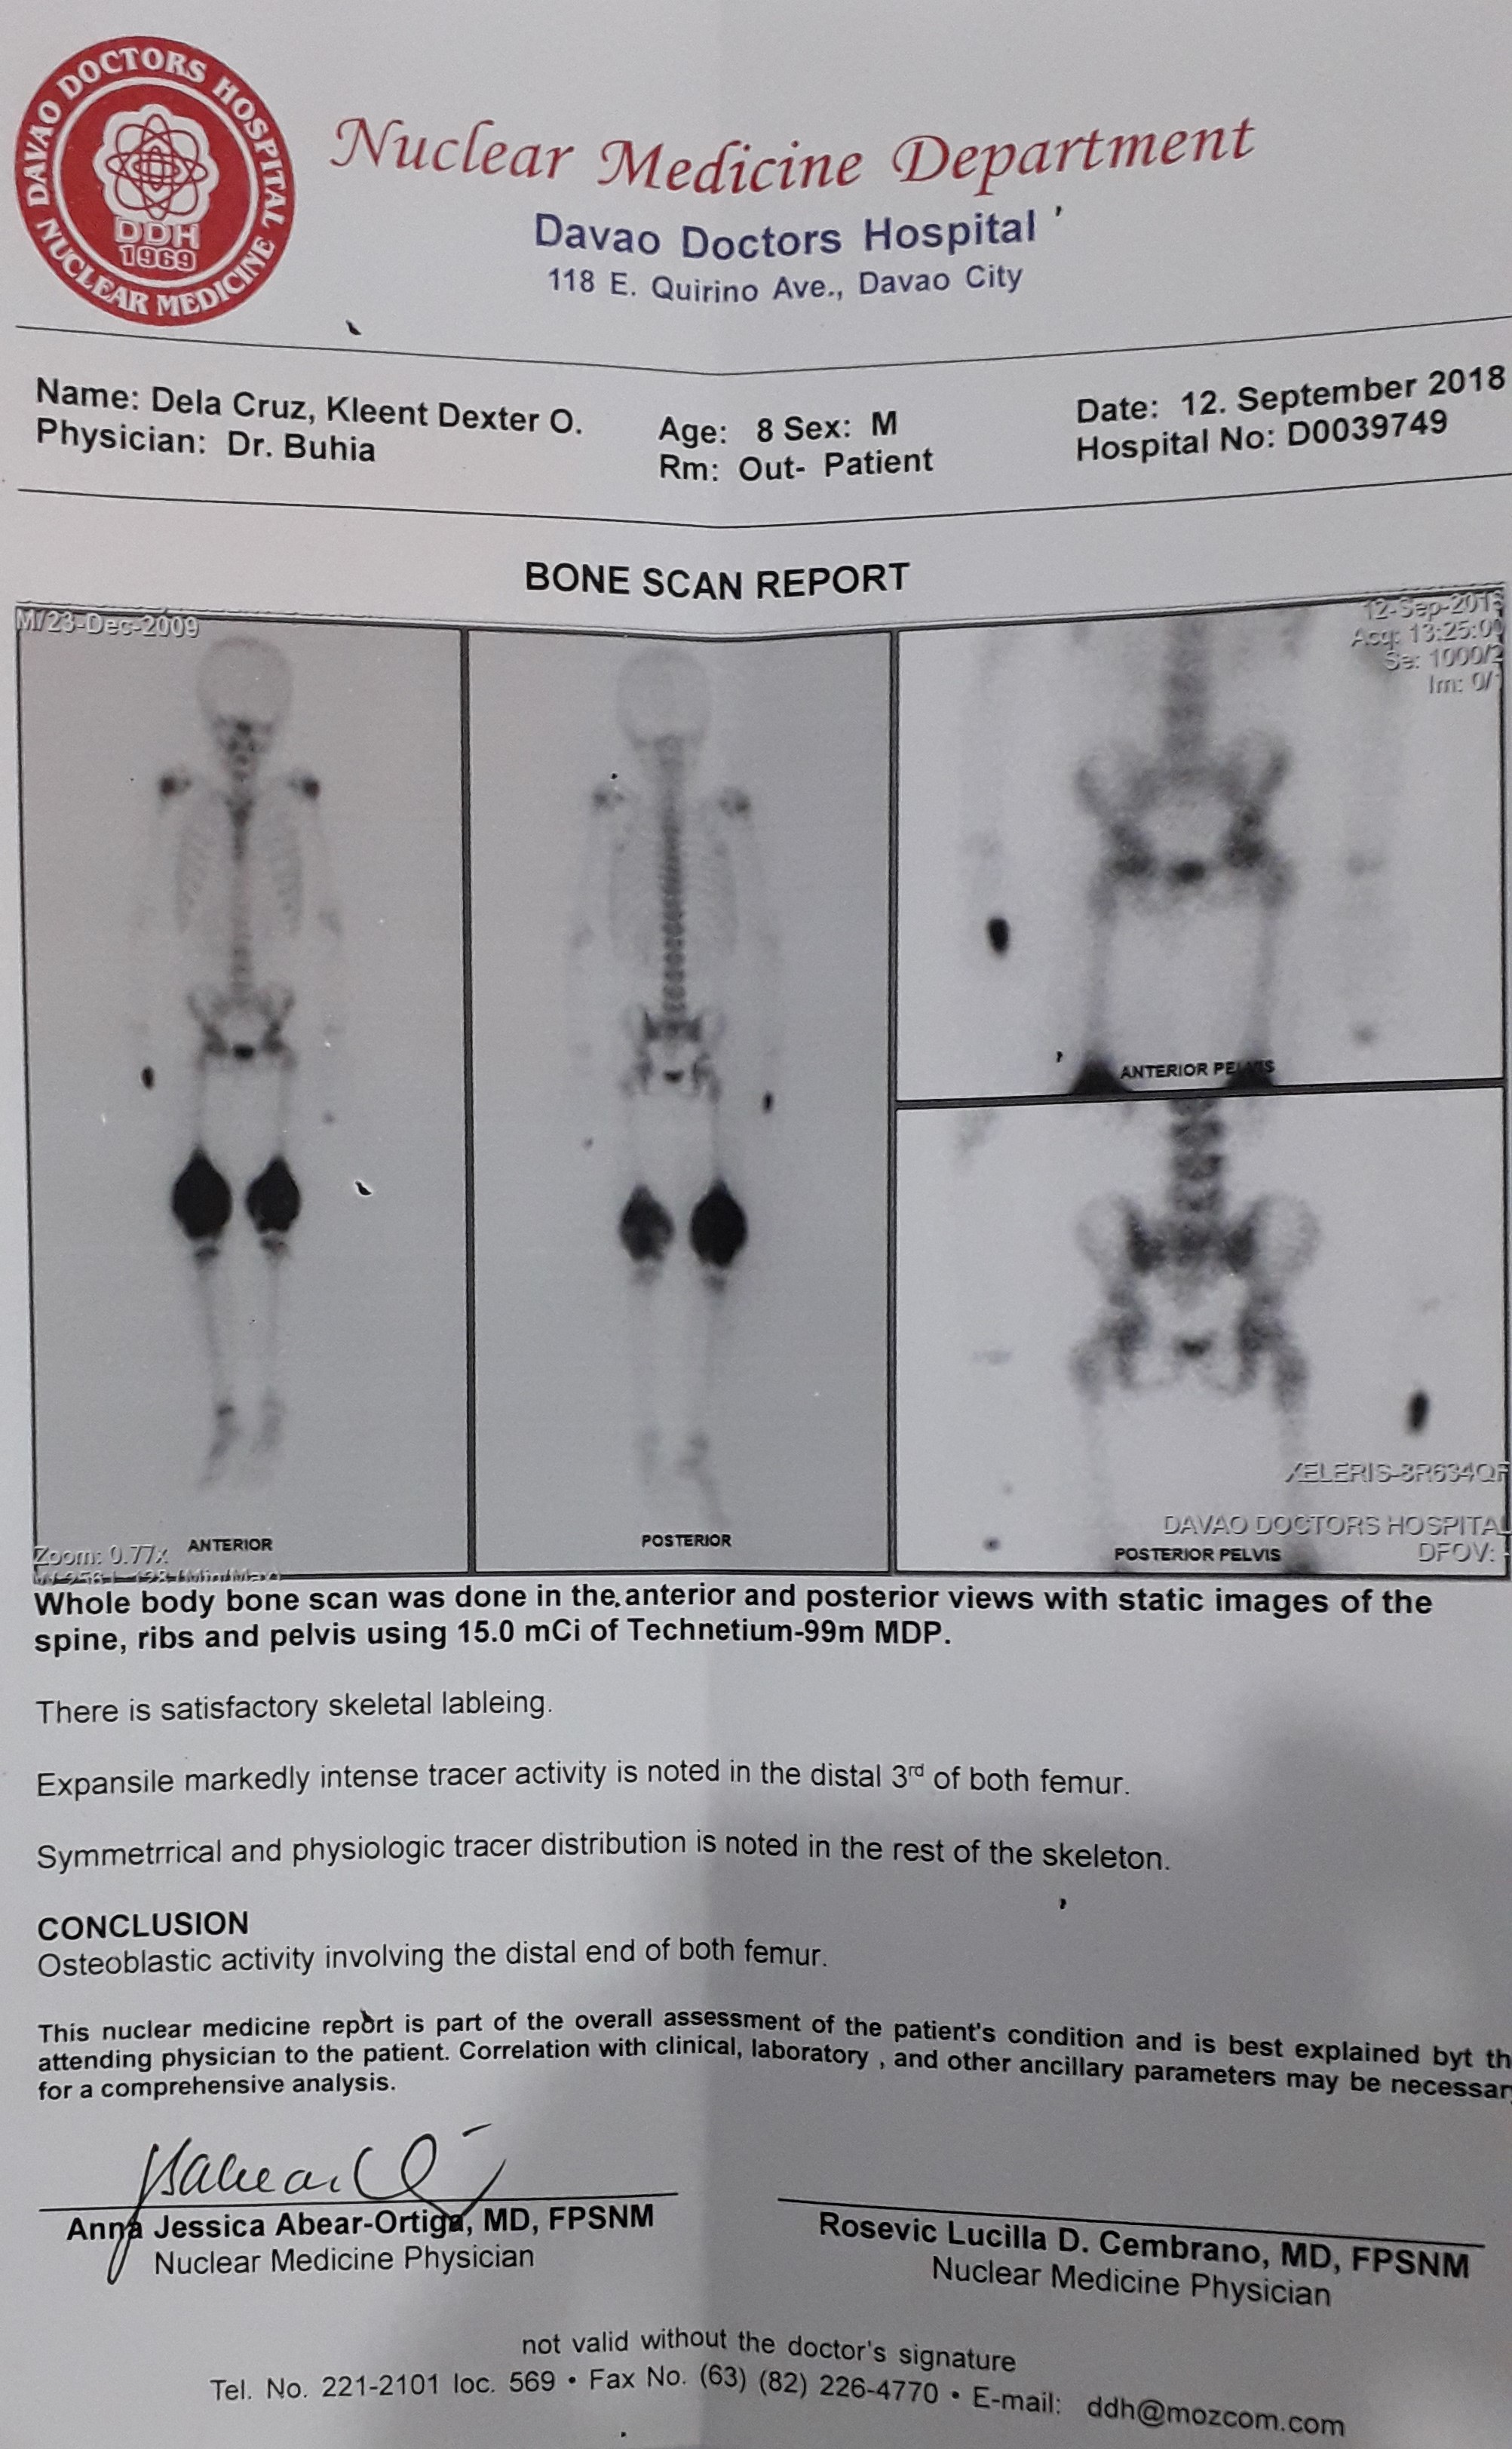 Bone scan results - osteoblastic activity in BOTH FEMURS